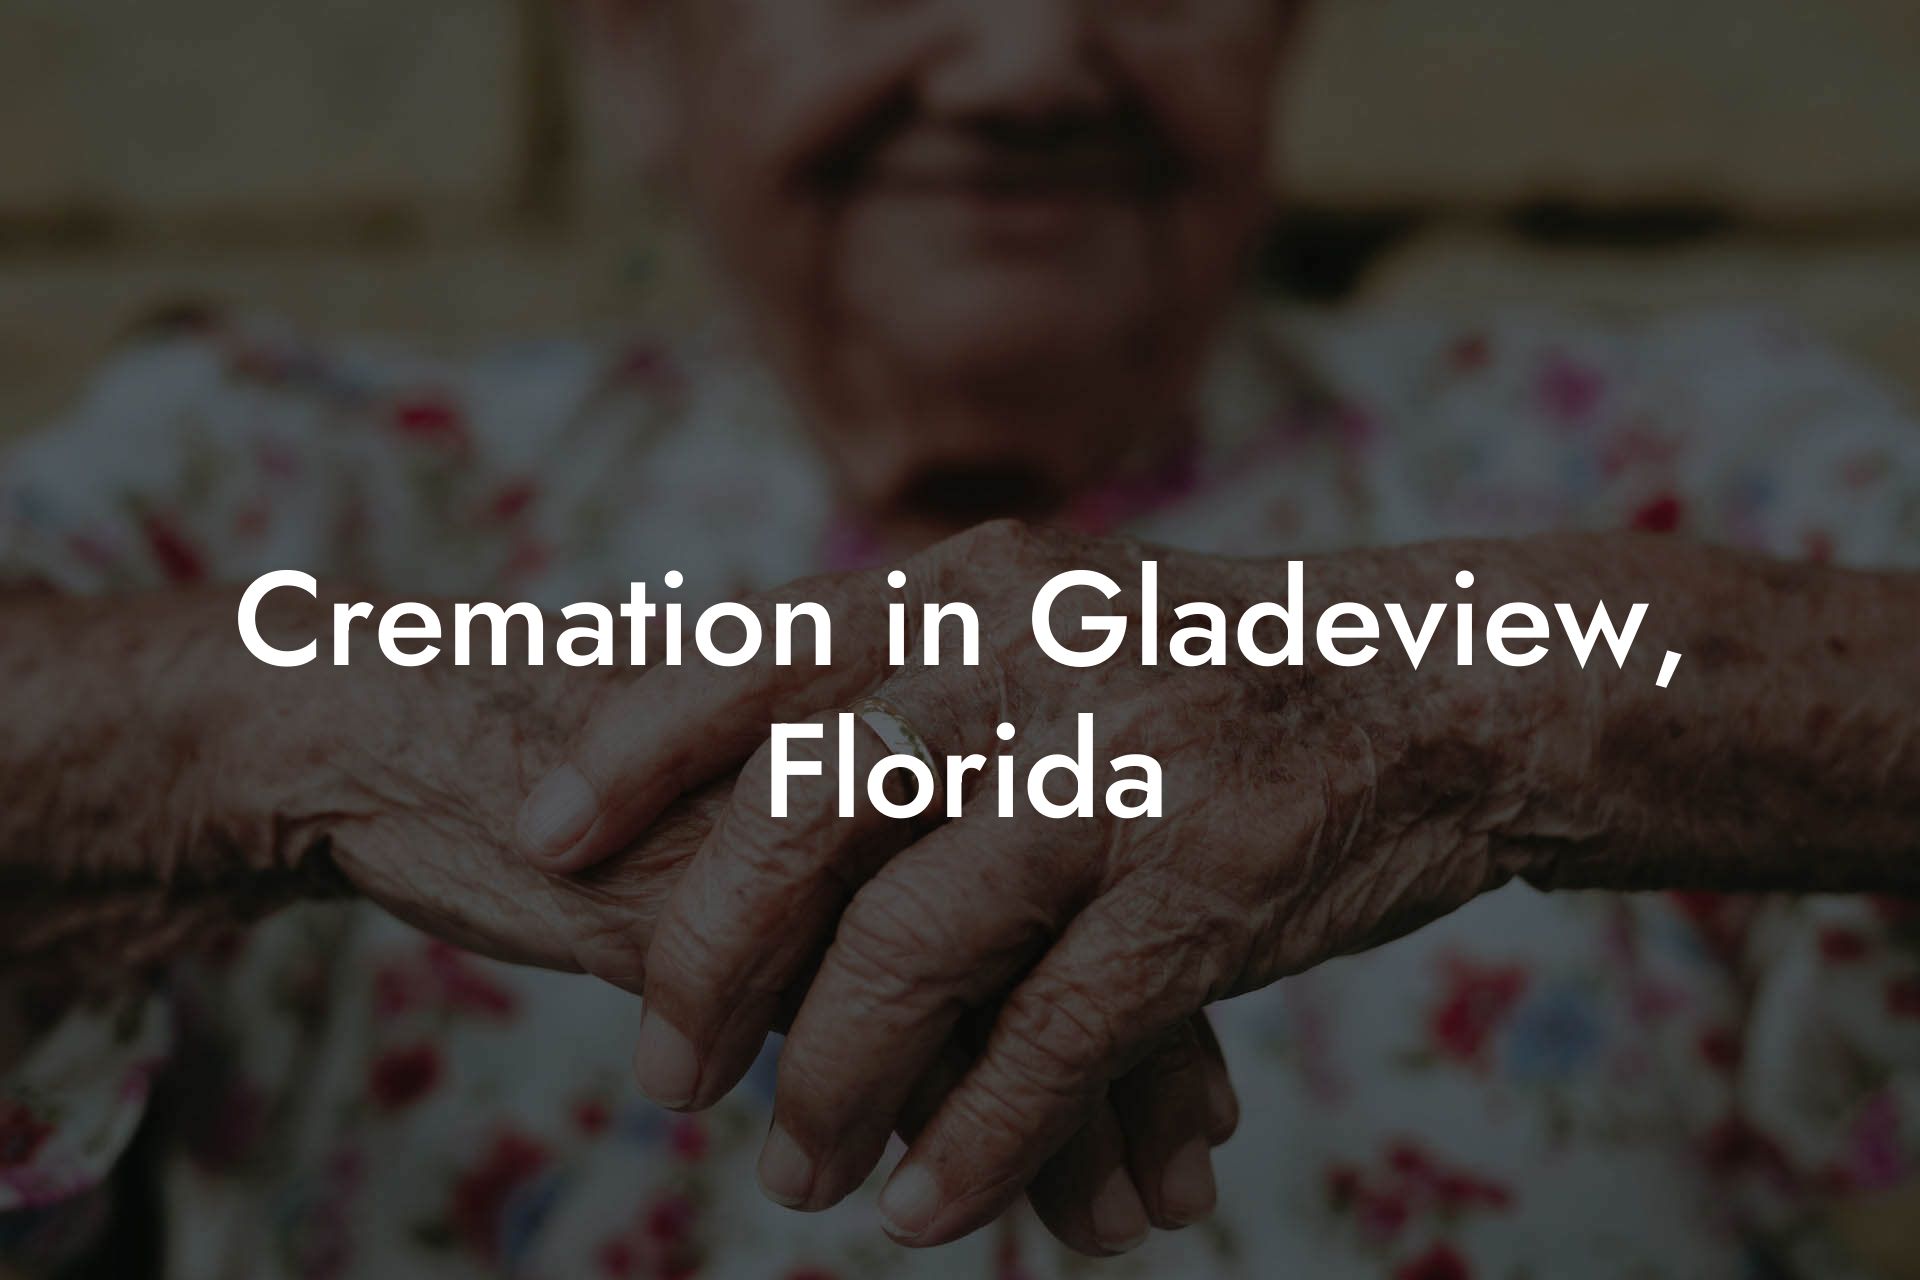 Cremation in Gladeview, Florida